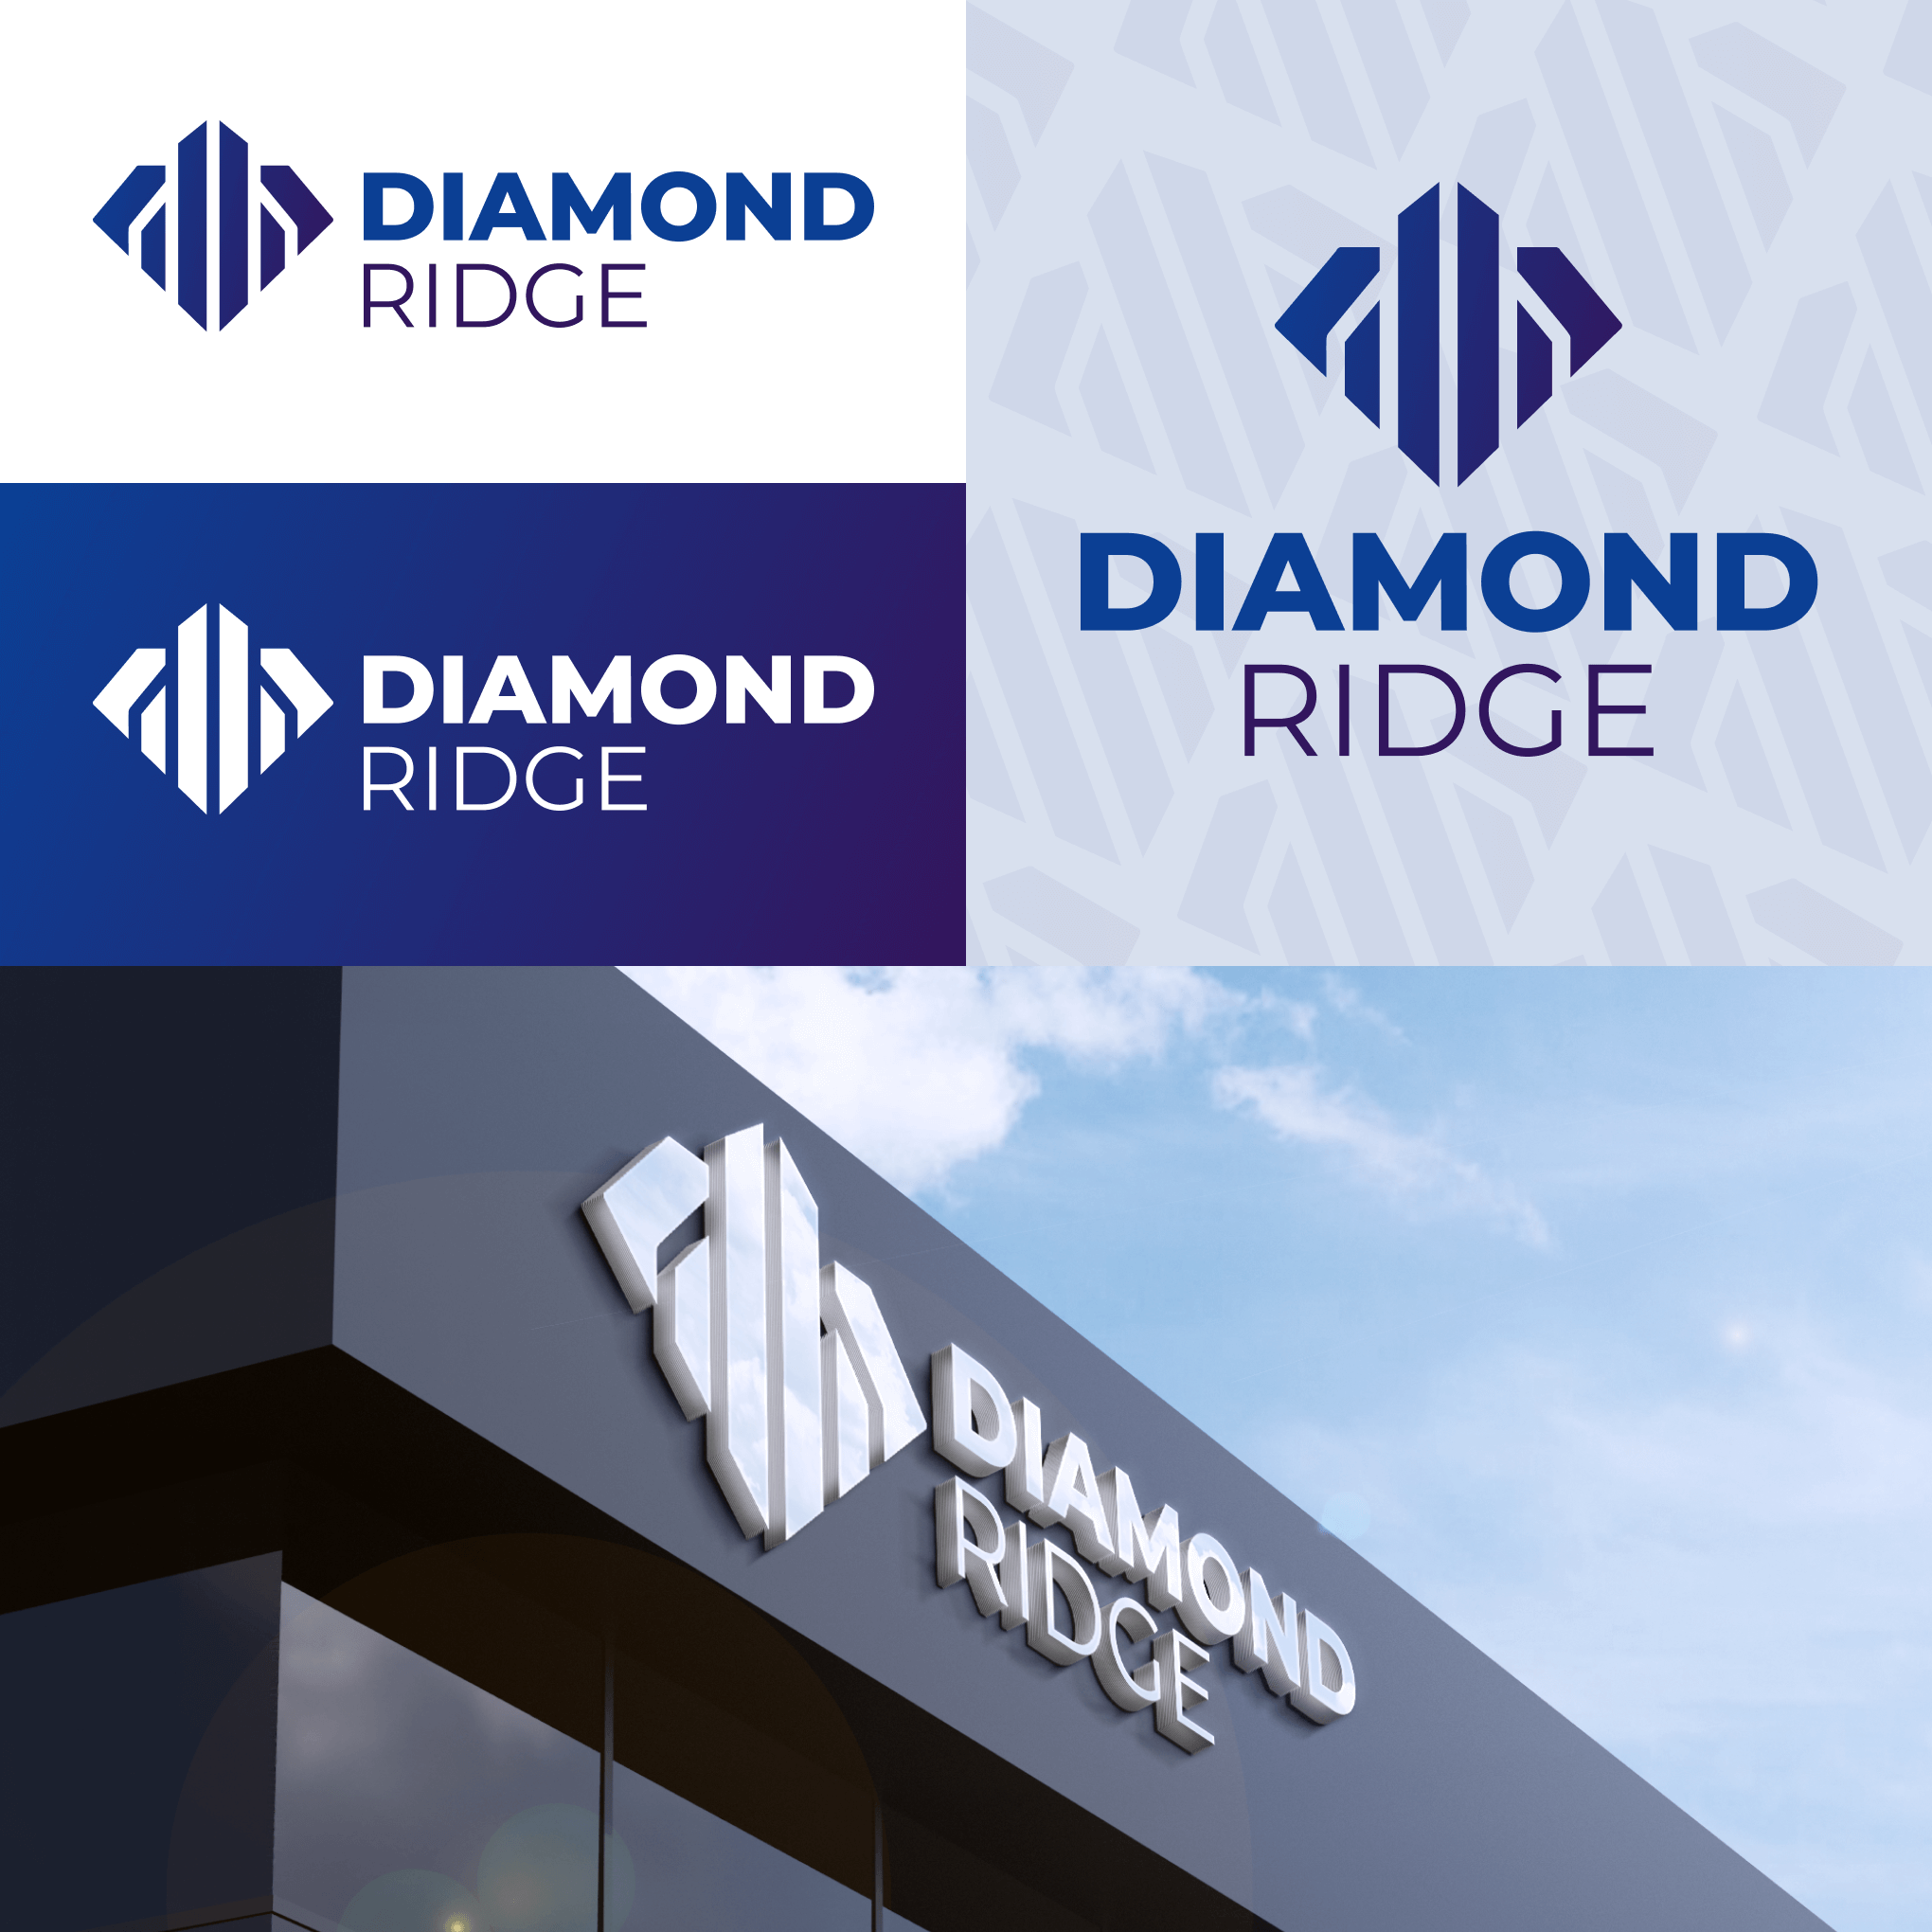 Logo Reddy designed for Diamond Ridge. A large city development and investment group. The logo features a diamond shape with building shapes inside of it.